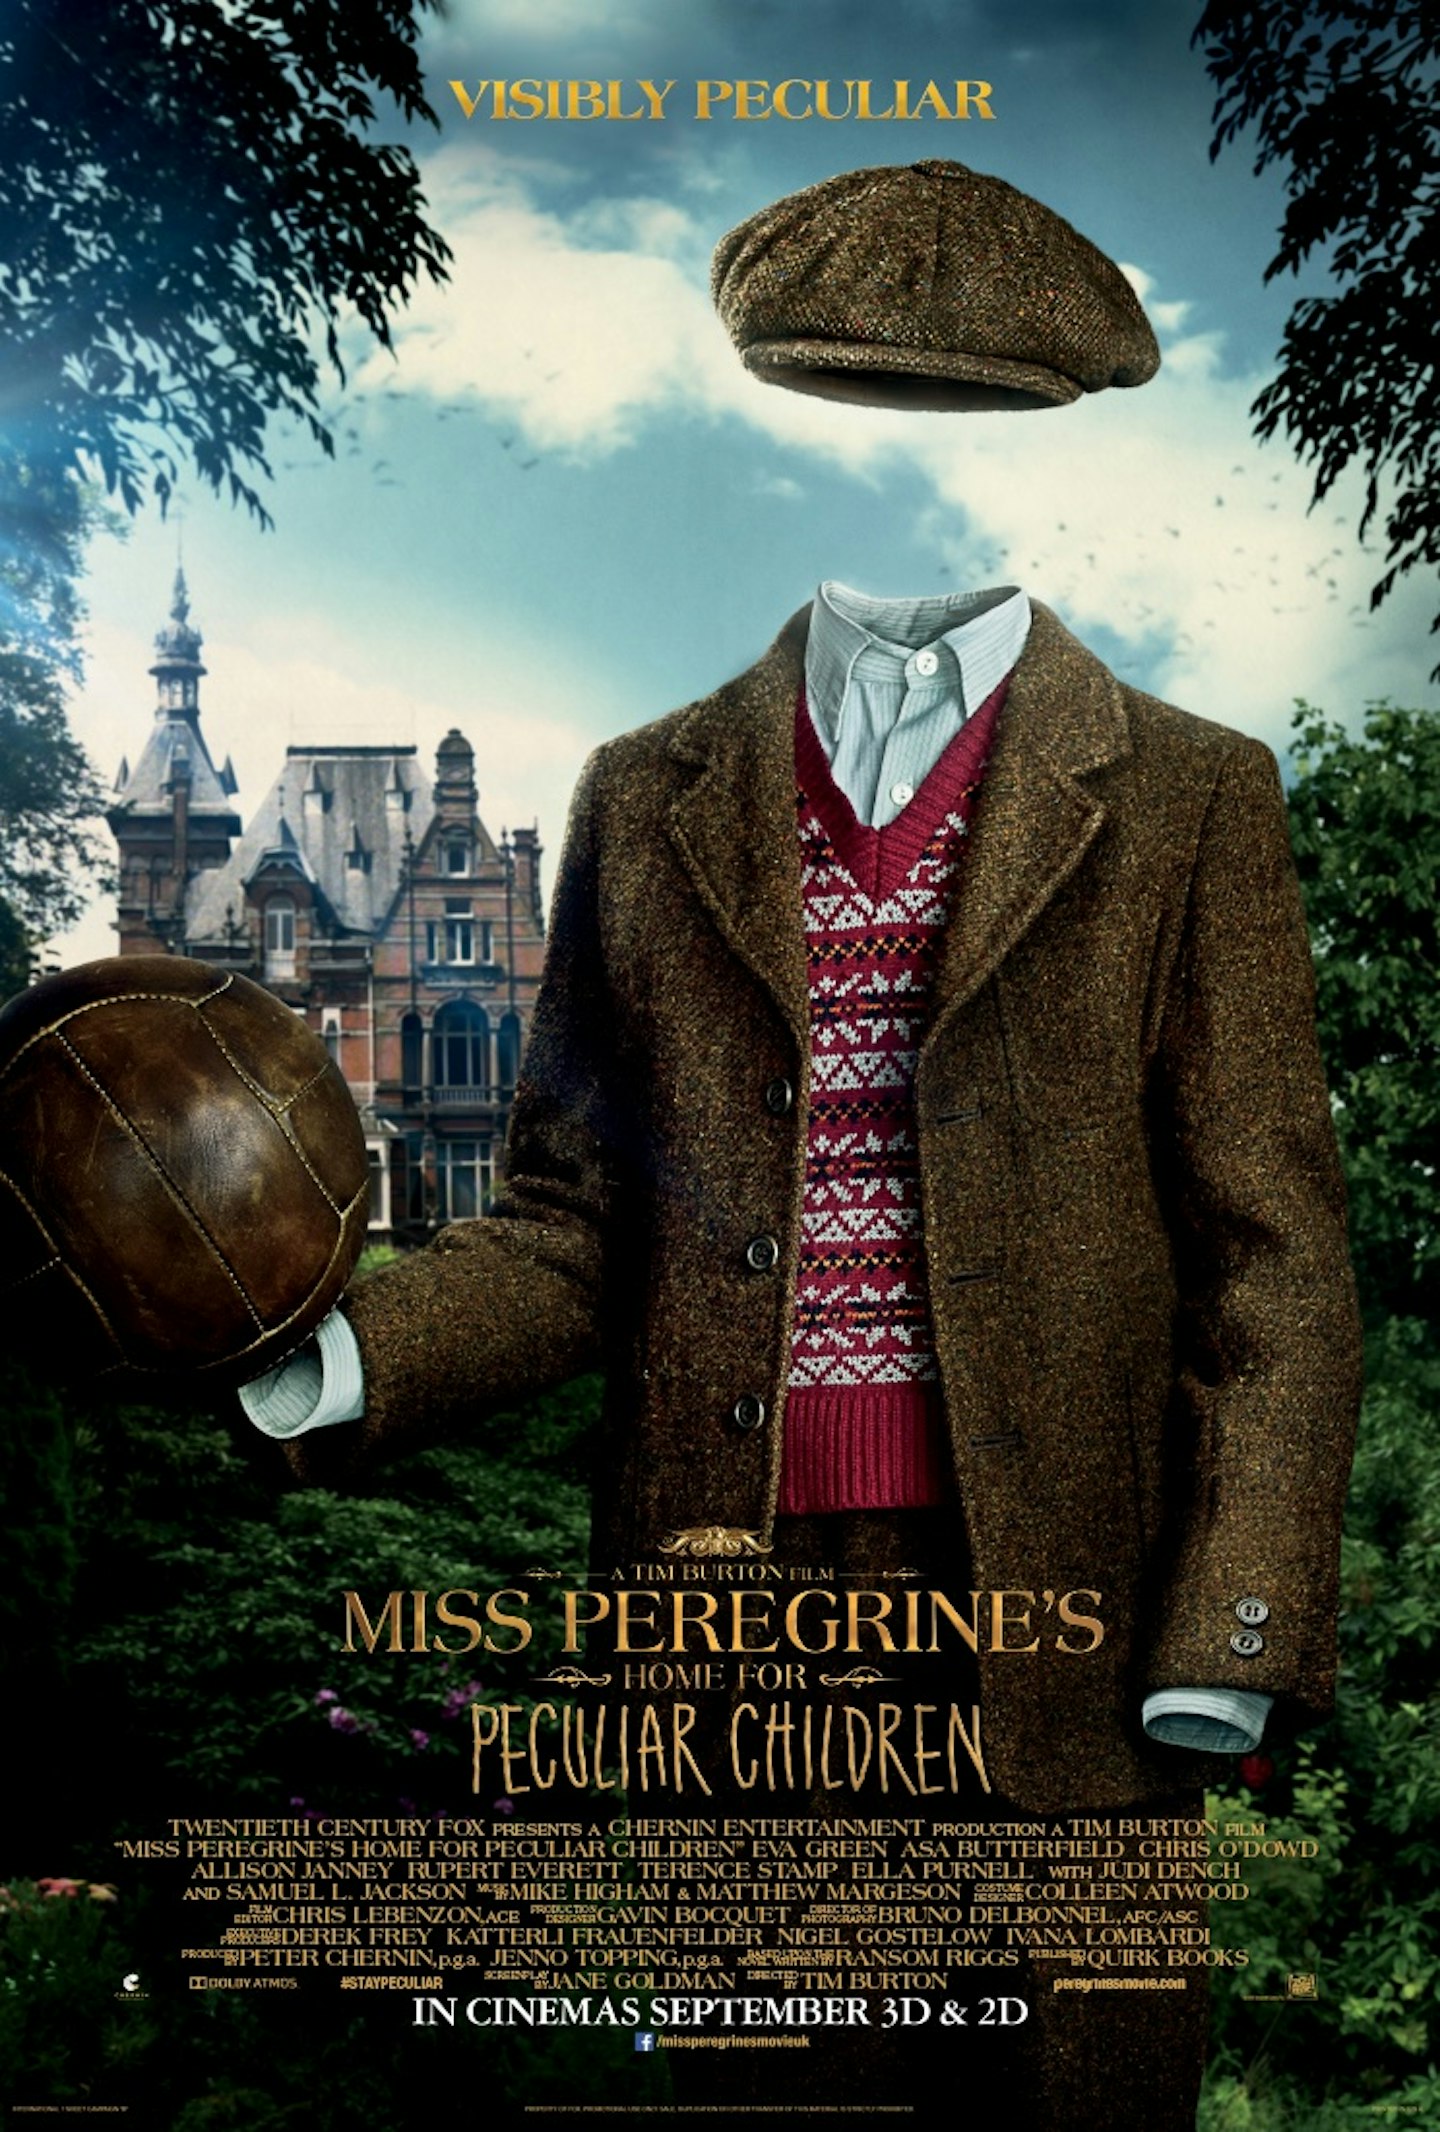 Miss Peregrine's Home for Peculiar Children characters posters